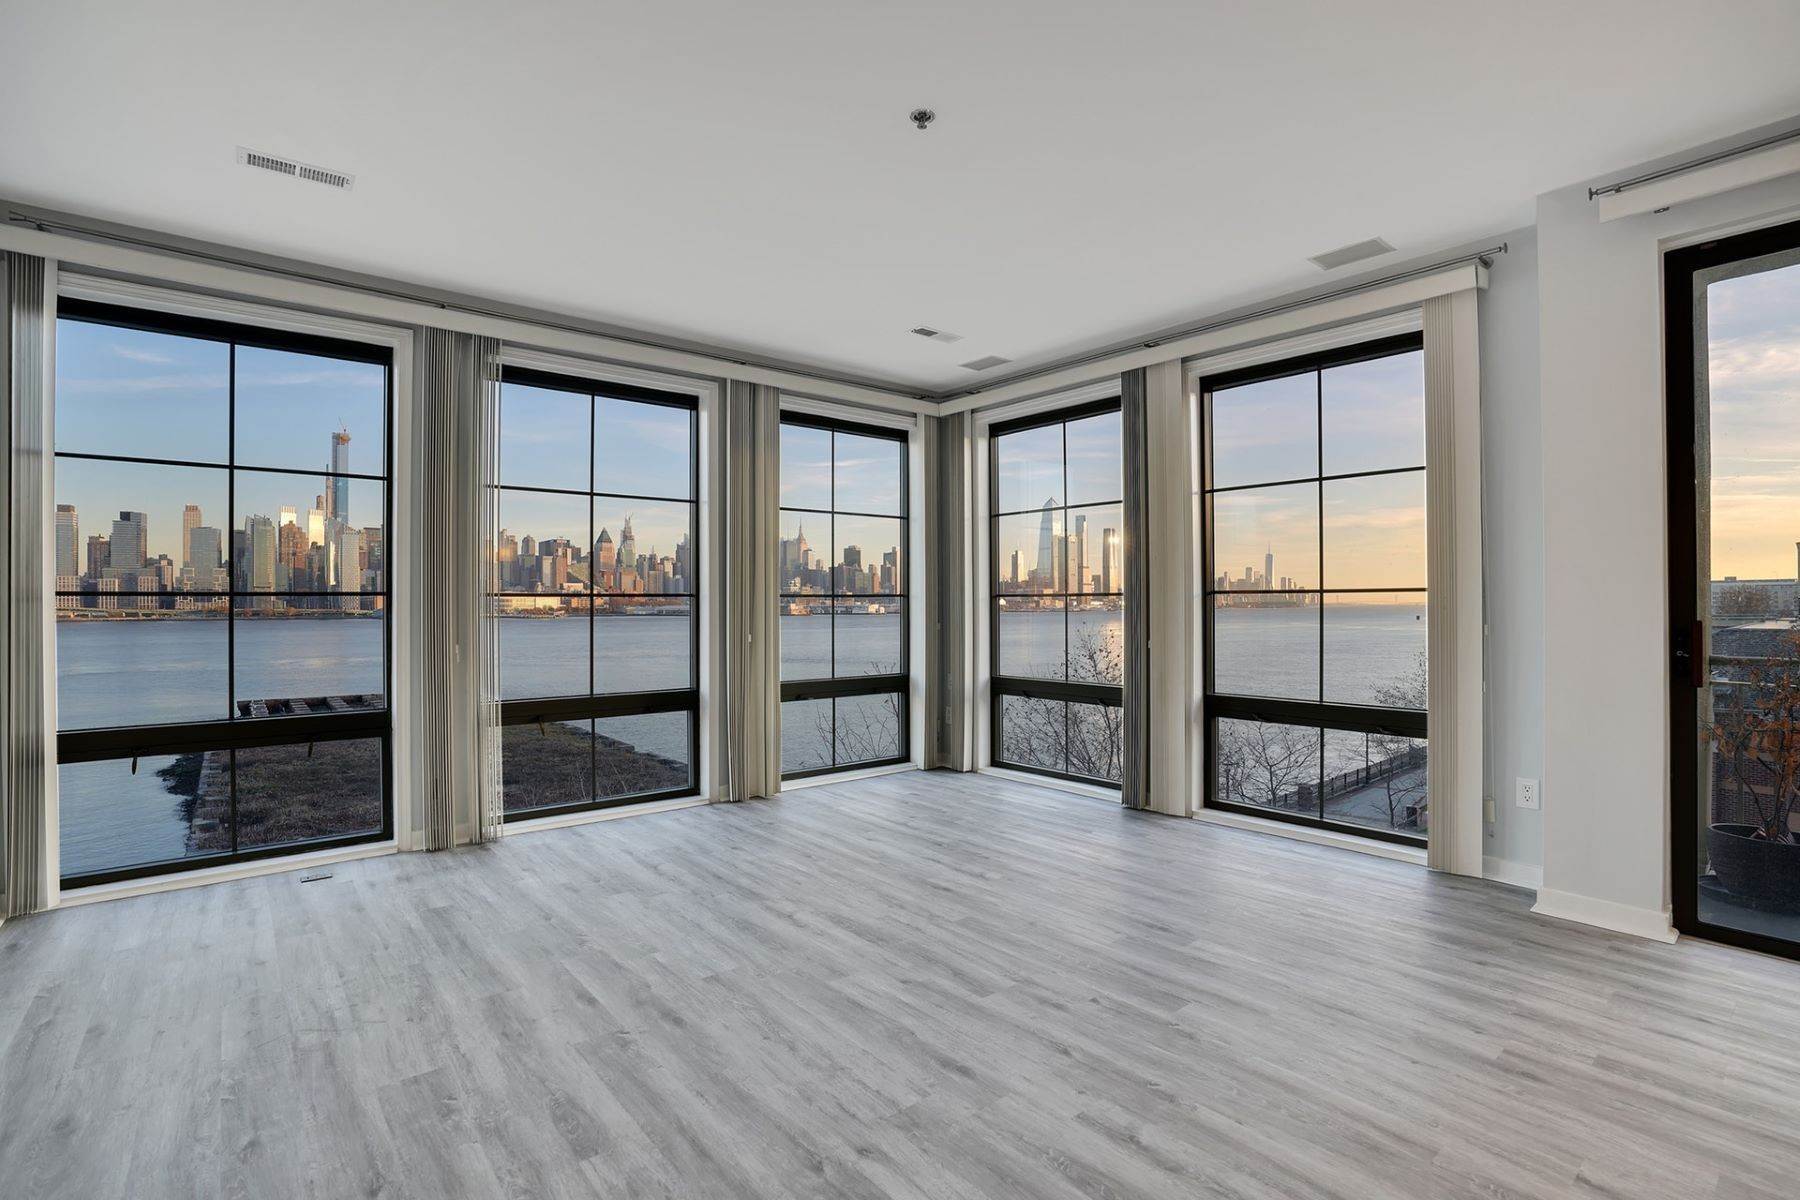 Condominiums for Sale at Enjoy this stunning South East home with NYC and the Hudson River views i 24 Avenue at Port Imperial #303 West New York, New Jersey 07093 United States